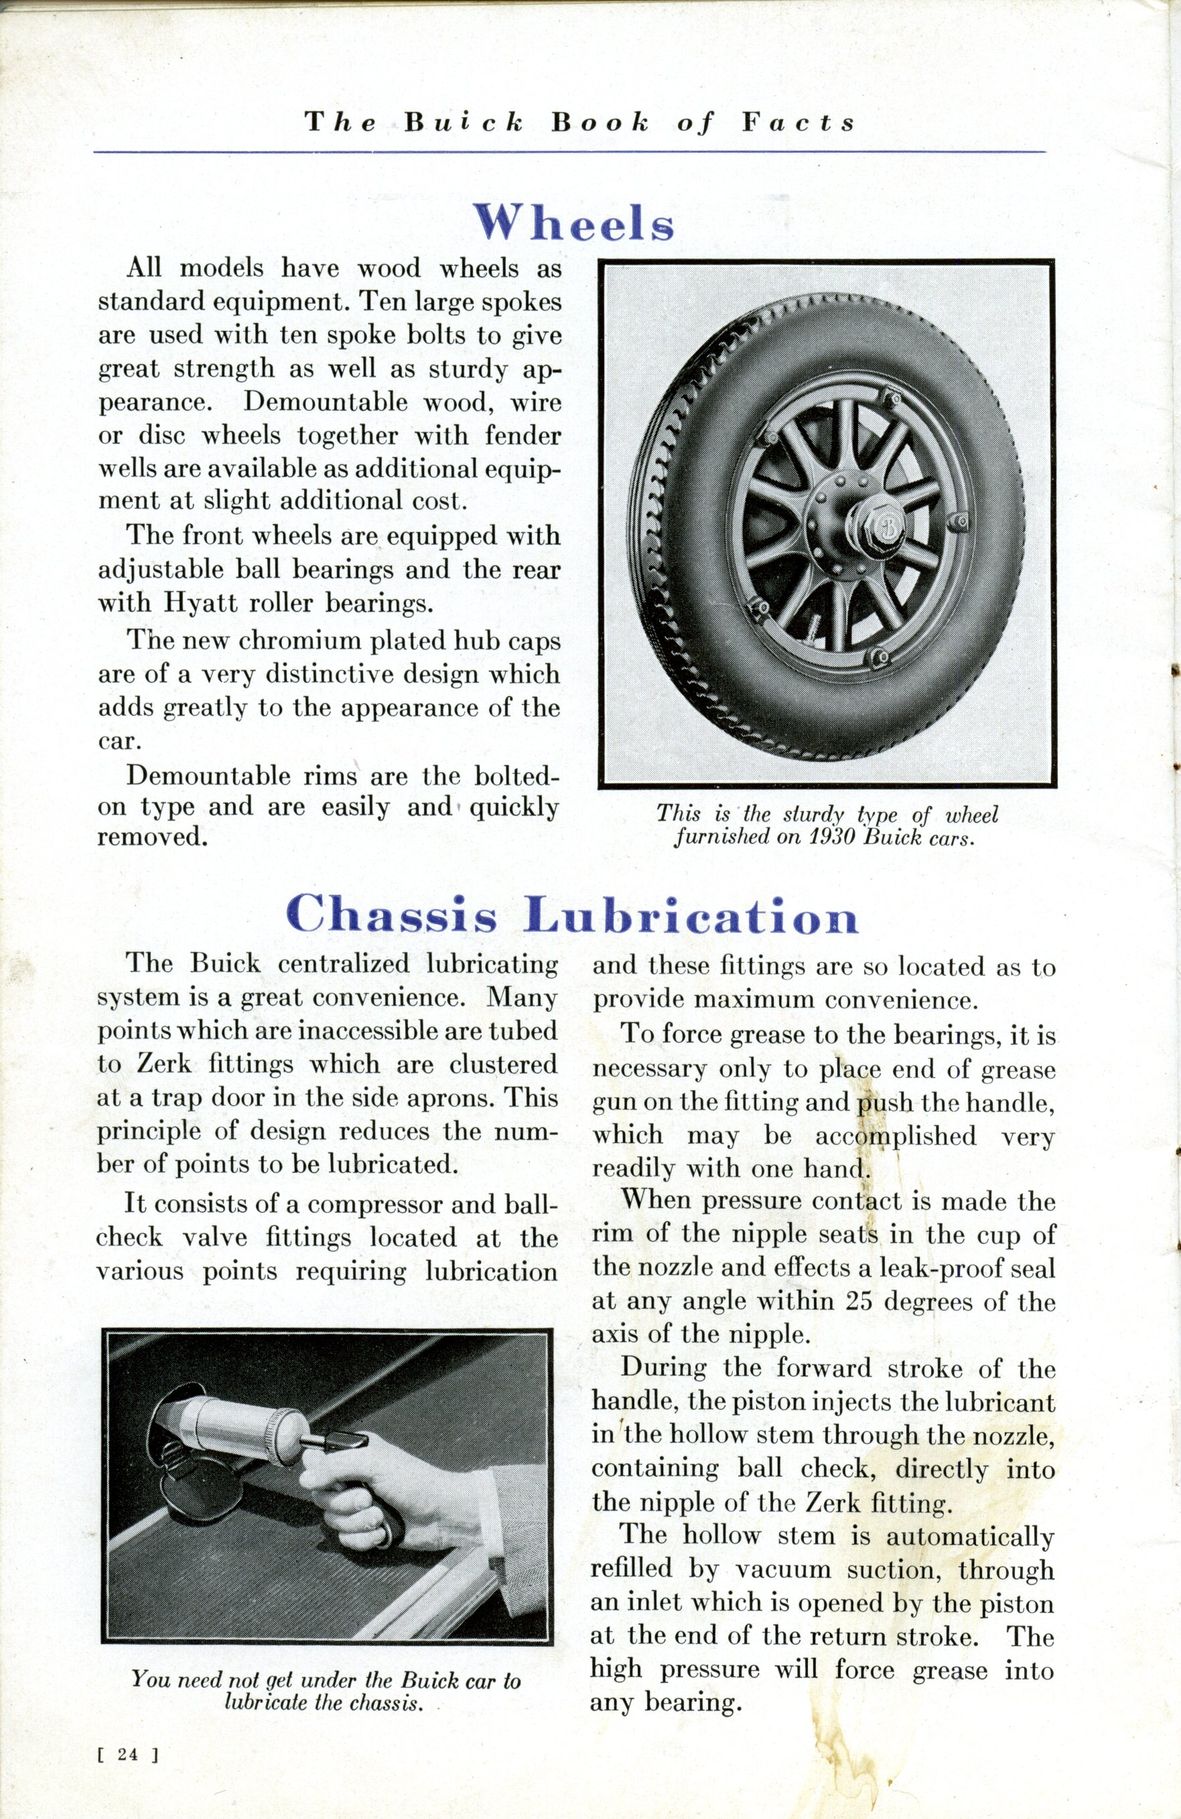 1930 Buick Book of Facts-24